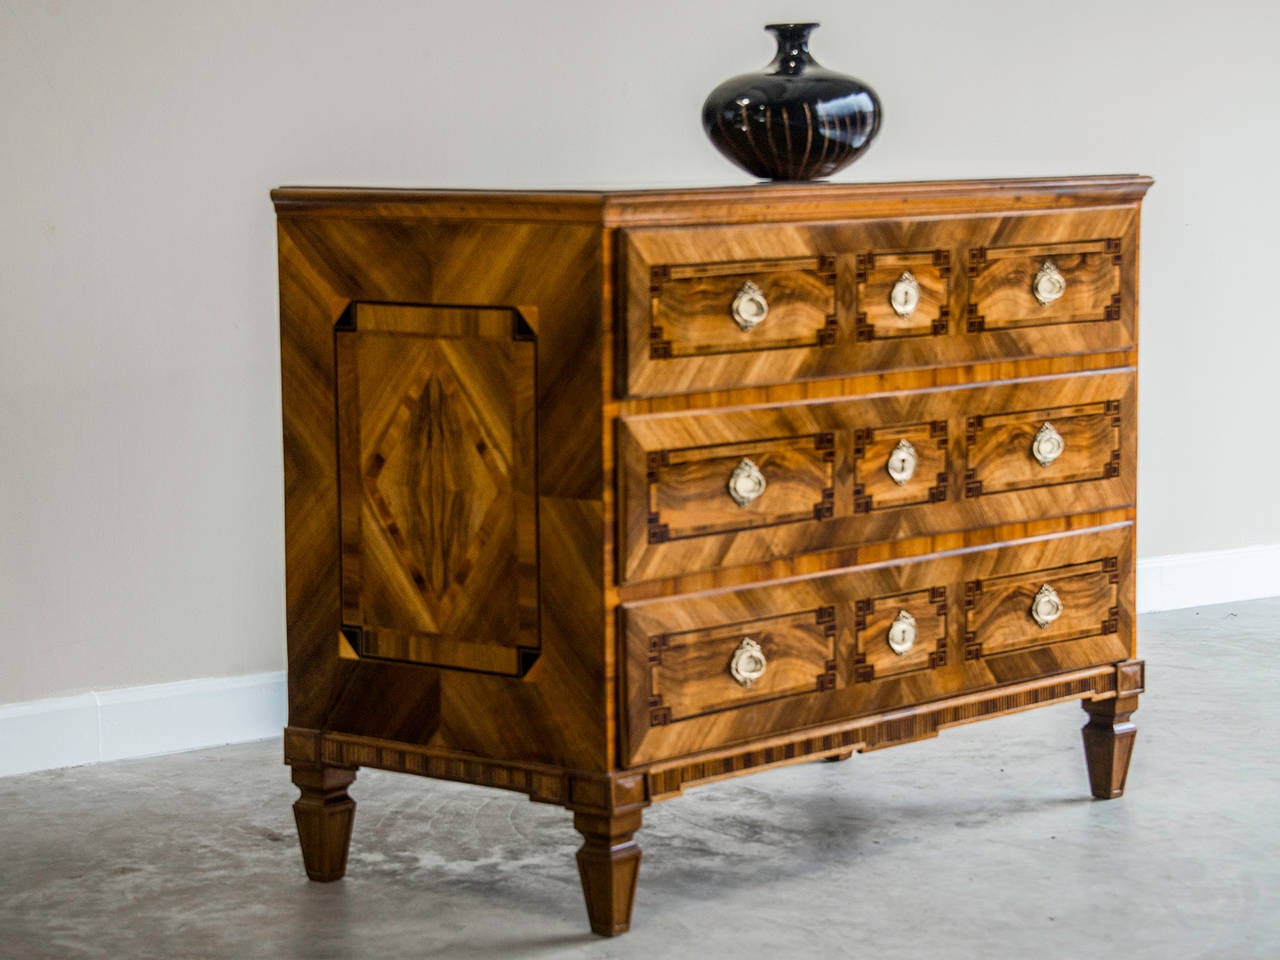 Louis XVI Period Inlaid Walnut Chest of Drawers, South Germany c.1785. The extraordinary pattern of inlay visible on the top, front and both sides of this three drawer chest is entirely neoclassical in nature. The attention to geometric precision in